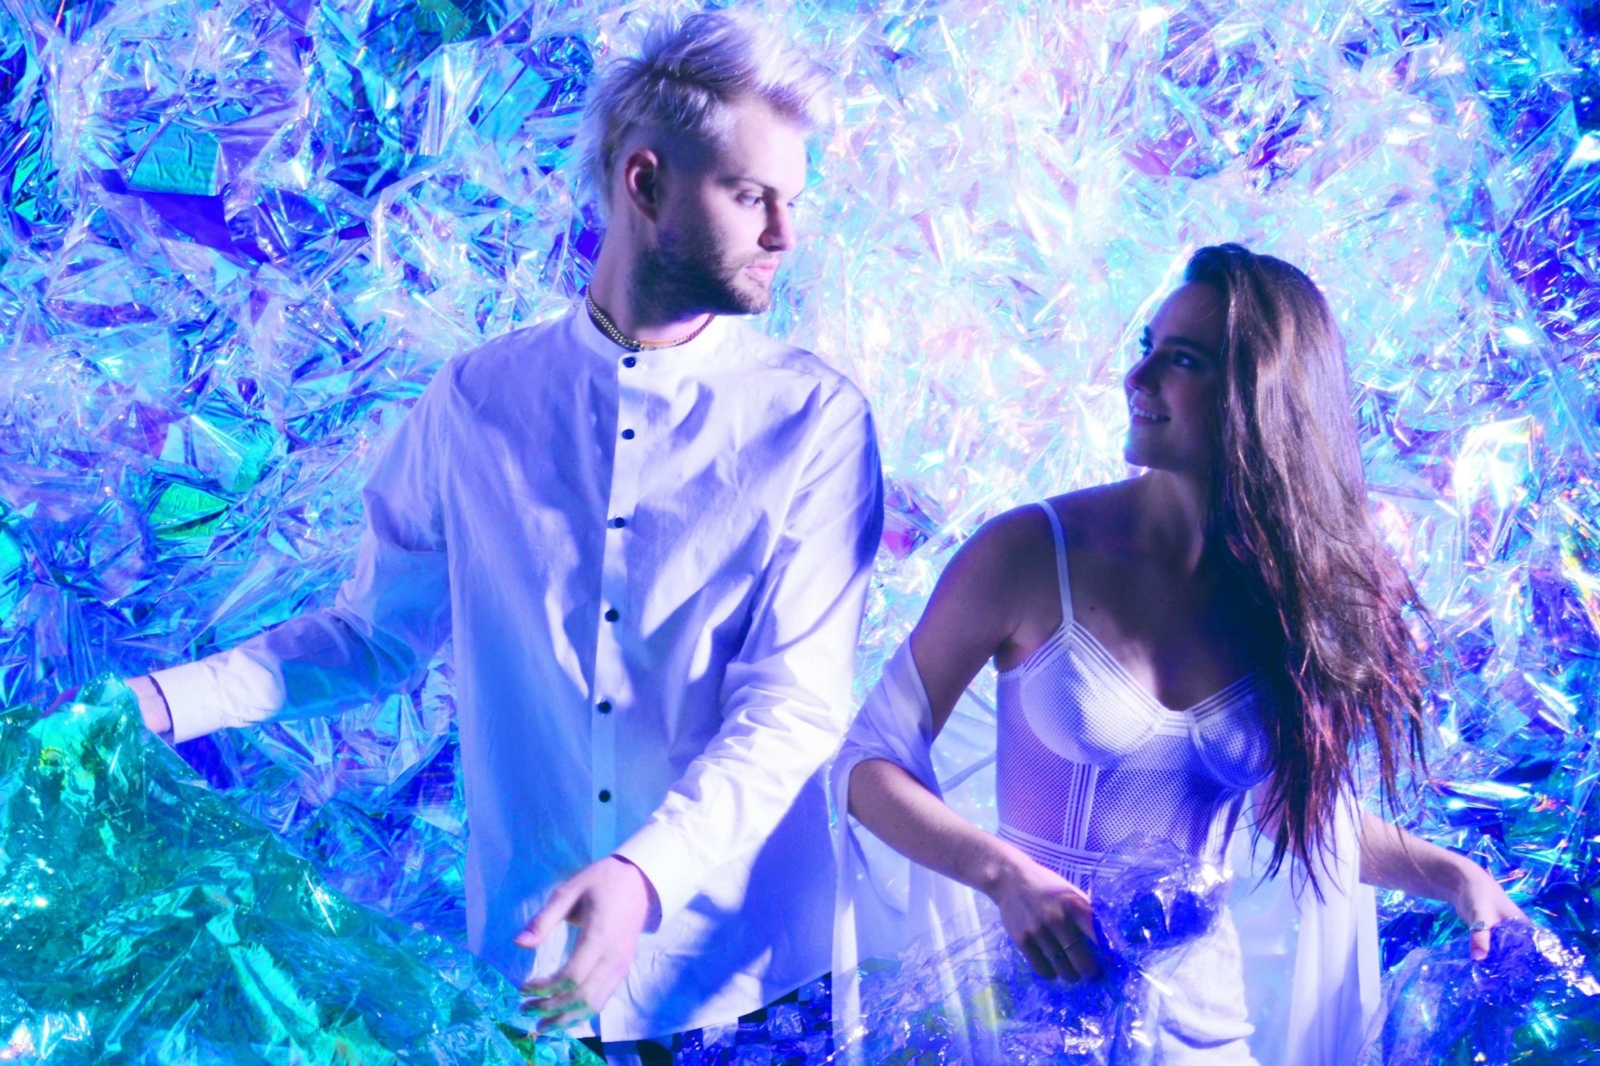 Sofi Tukker team up with Pabllo Vittar for 'Energia (Parte 2)' video